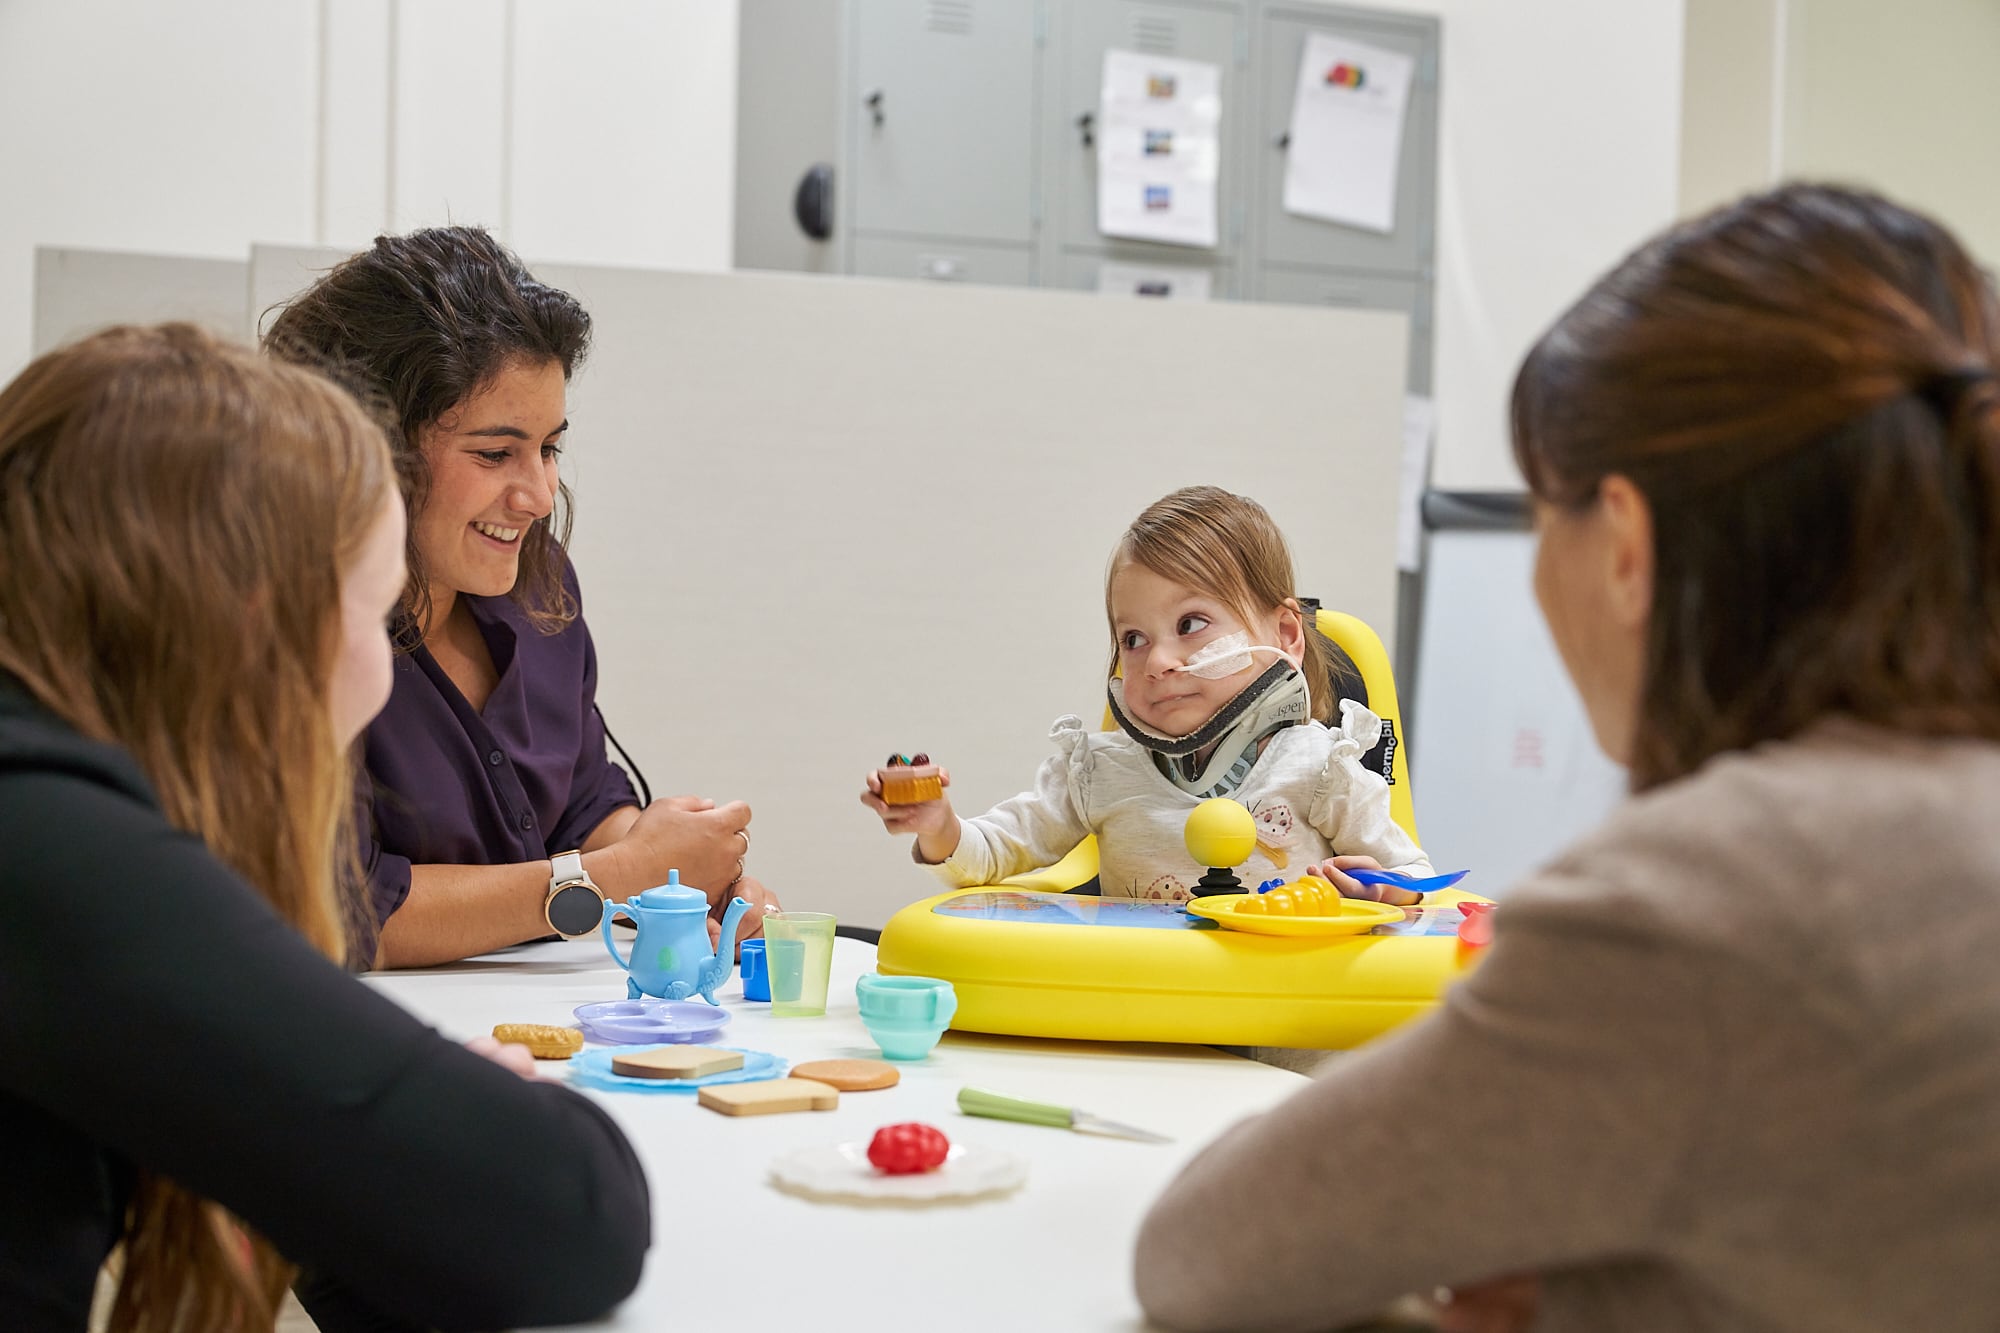 3 adults support a young child as she engages in play. The young child sits in a yellow Explorer Mini assistive technology device. She has light brown hair and uses a feeding tube and neck brace. 